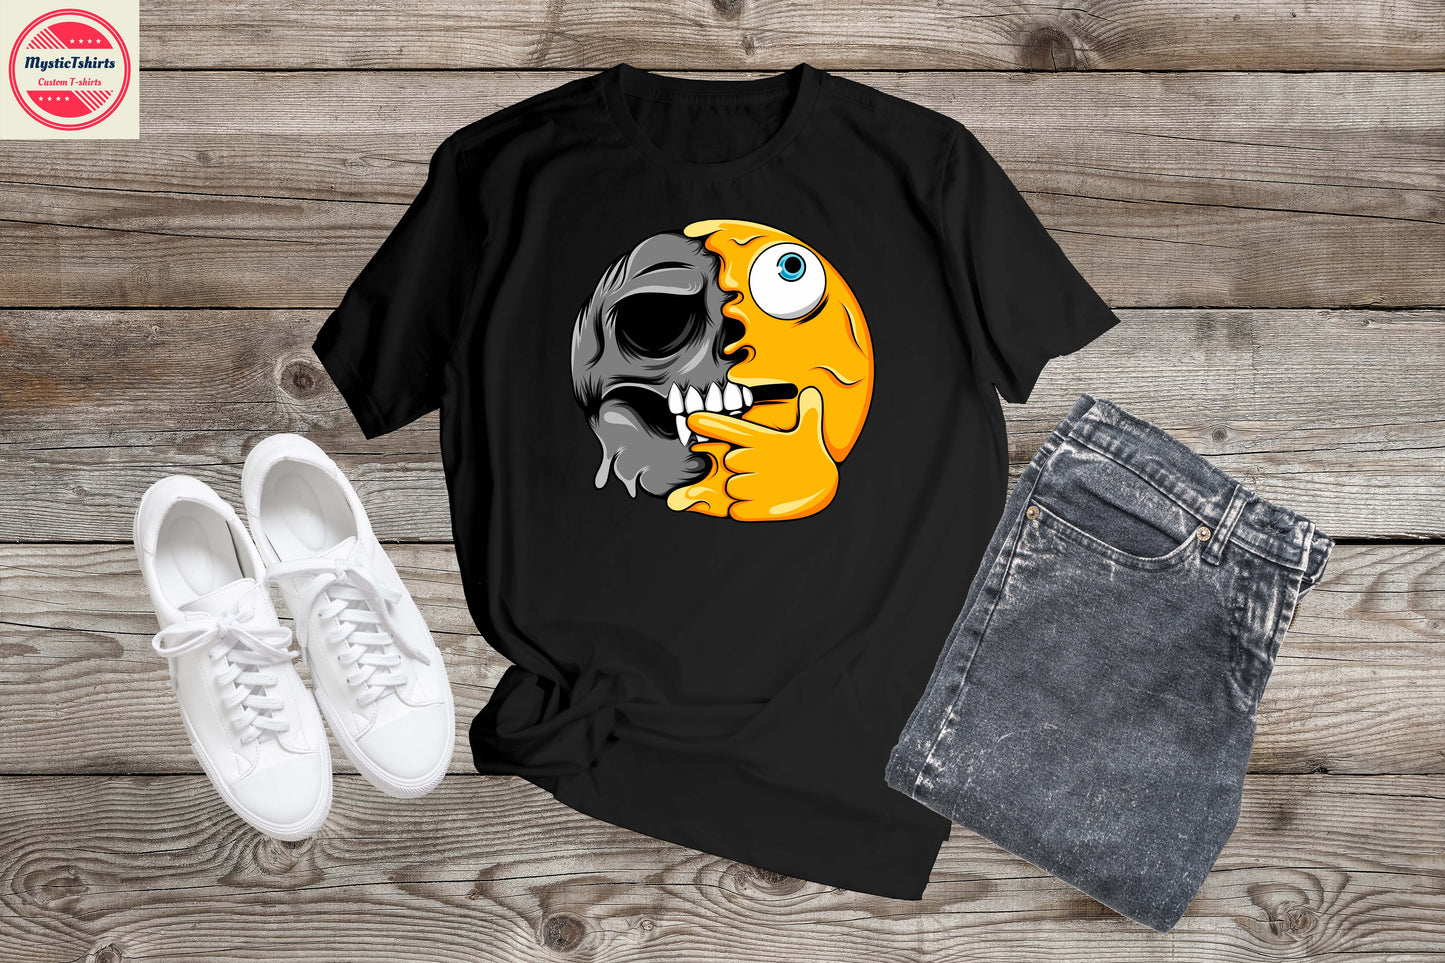 075. CRAZY FACE, Personalized T-Shirt, Custom Text, Make Your Own Shirt, Custom Tee